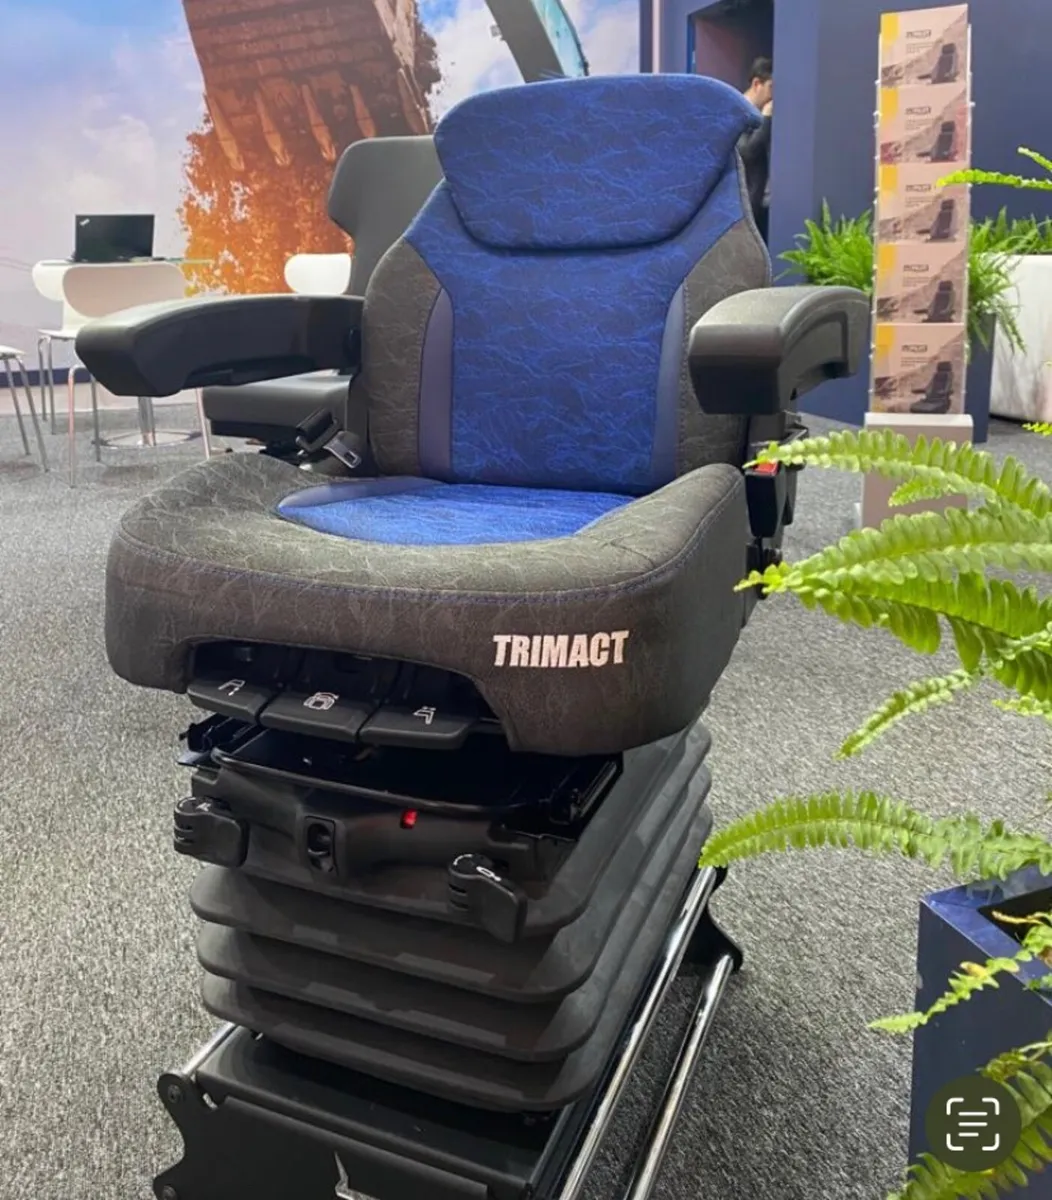 TRACTOR SEATS - ALL MAKES & MODELS!